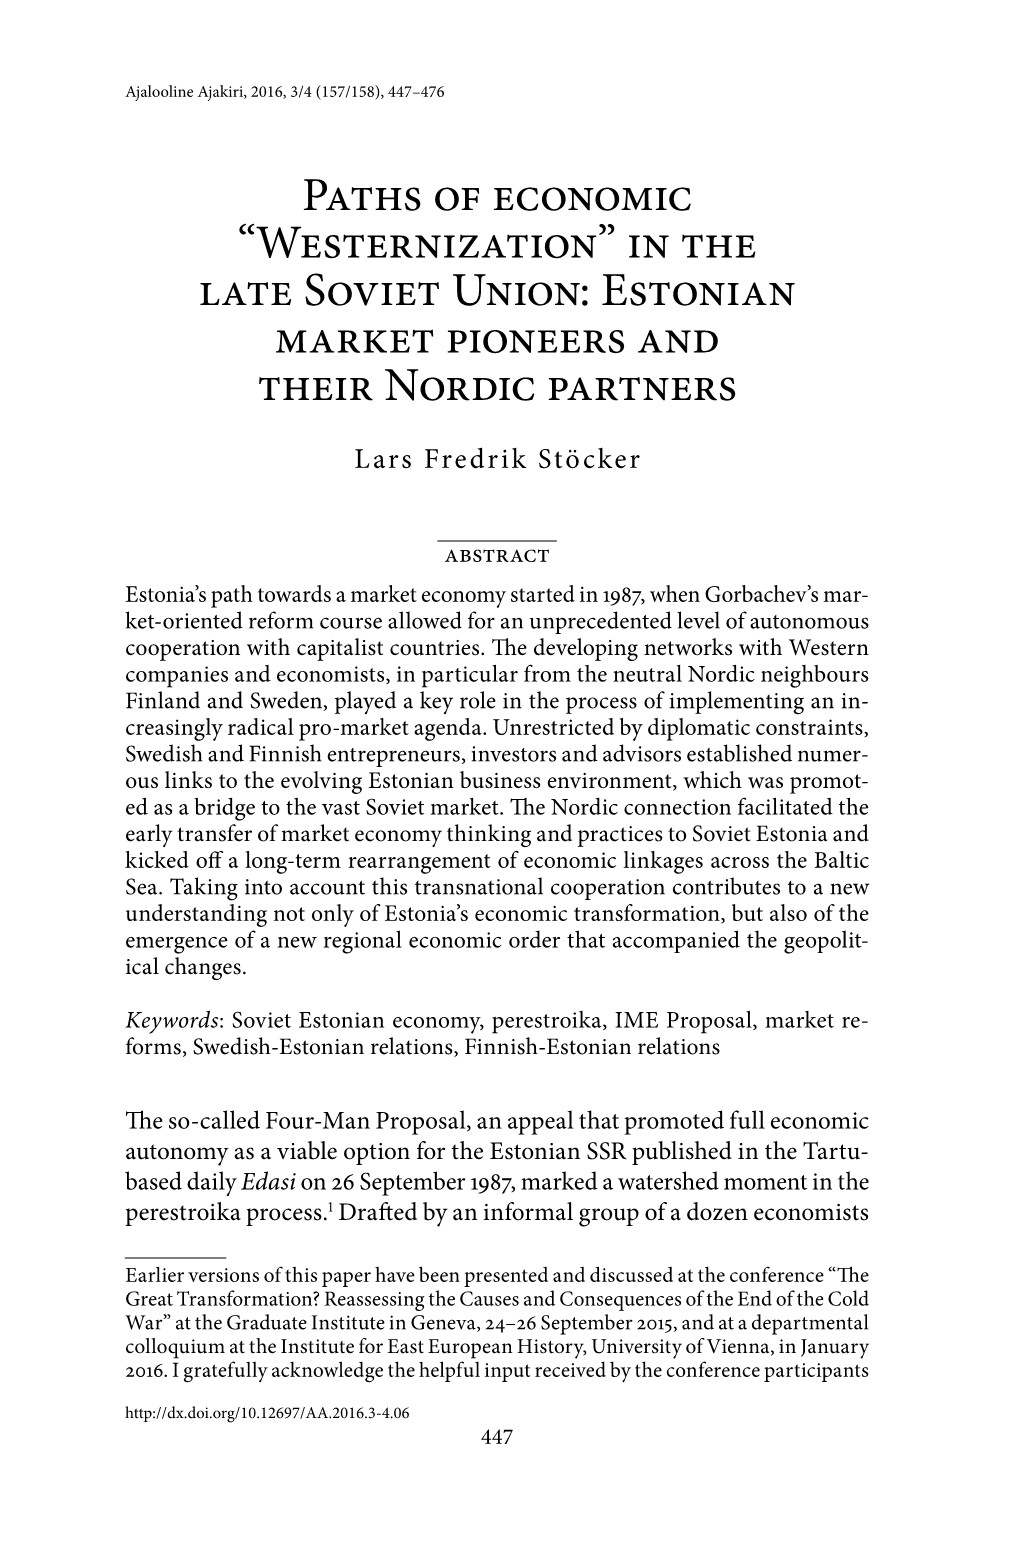 Paths of Economic “Westernization” in the Late Soviet Union: Estonian Market Pioneers and Their Nordic Partners